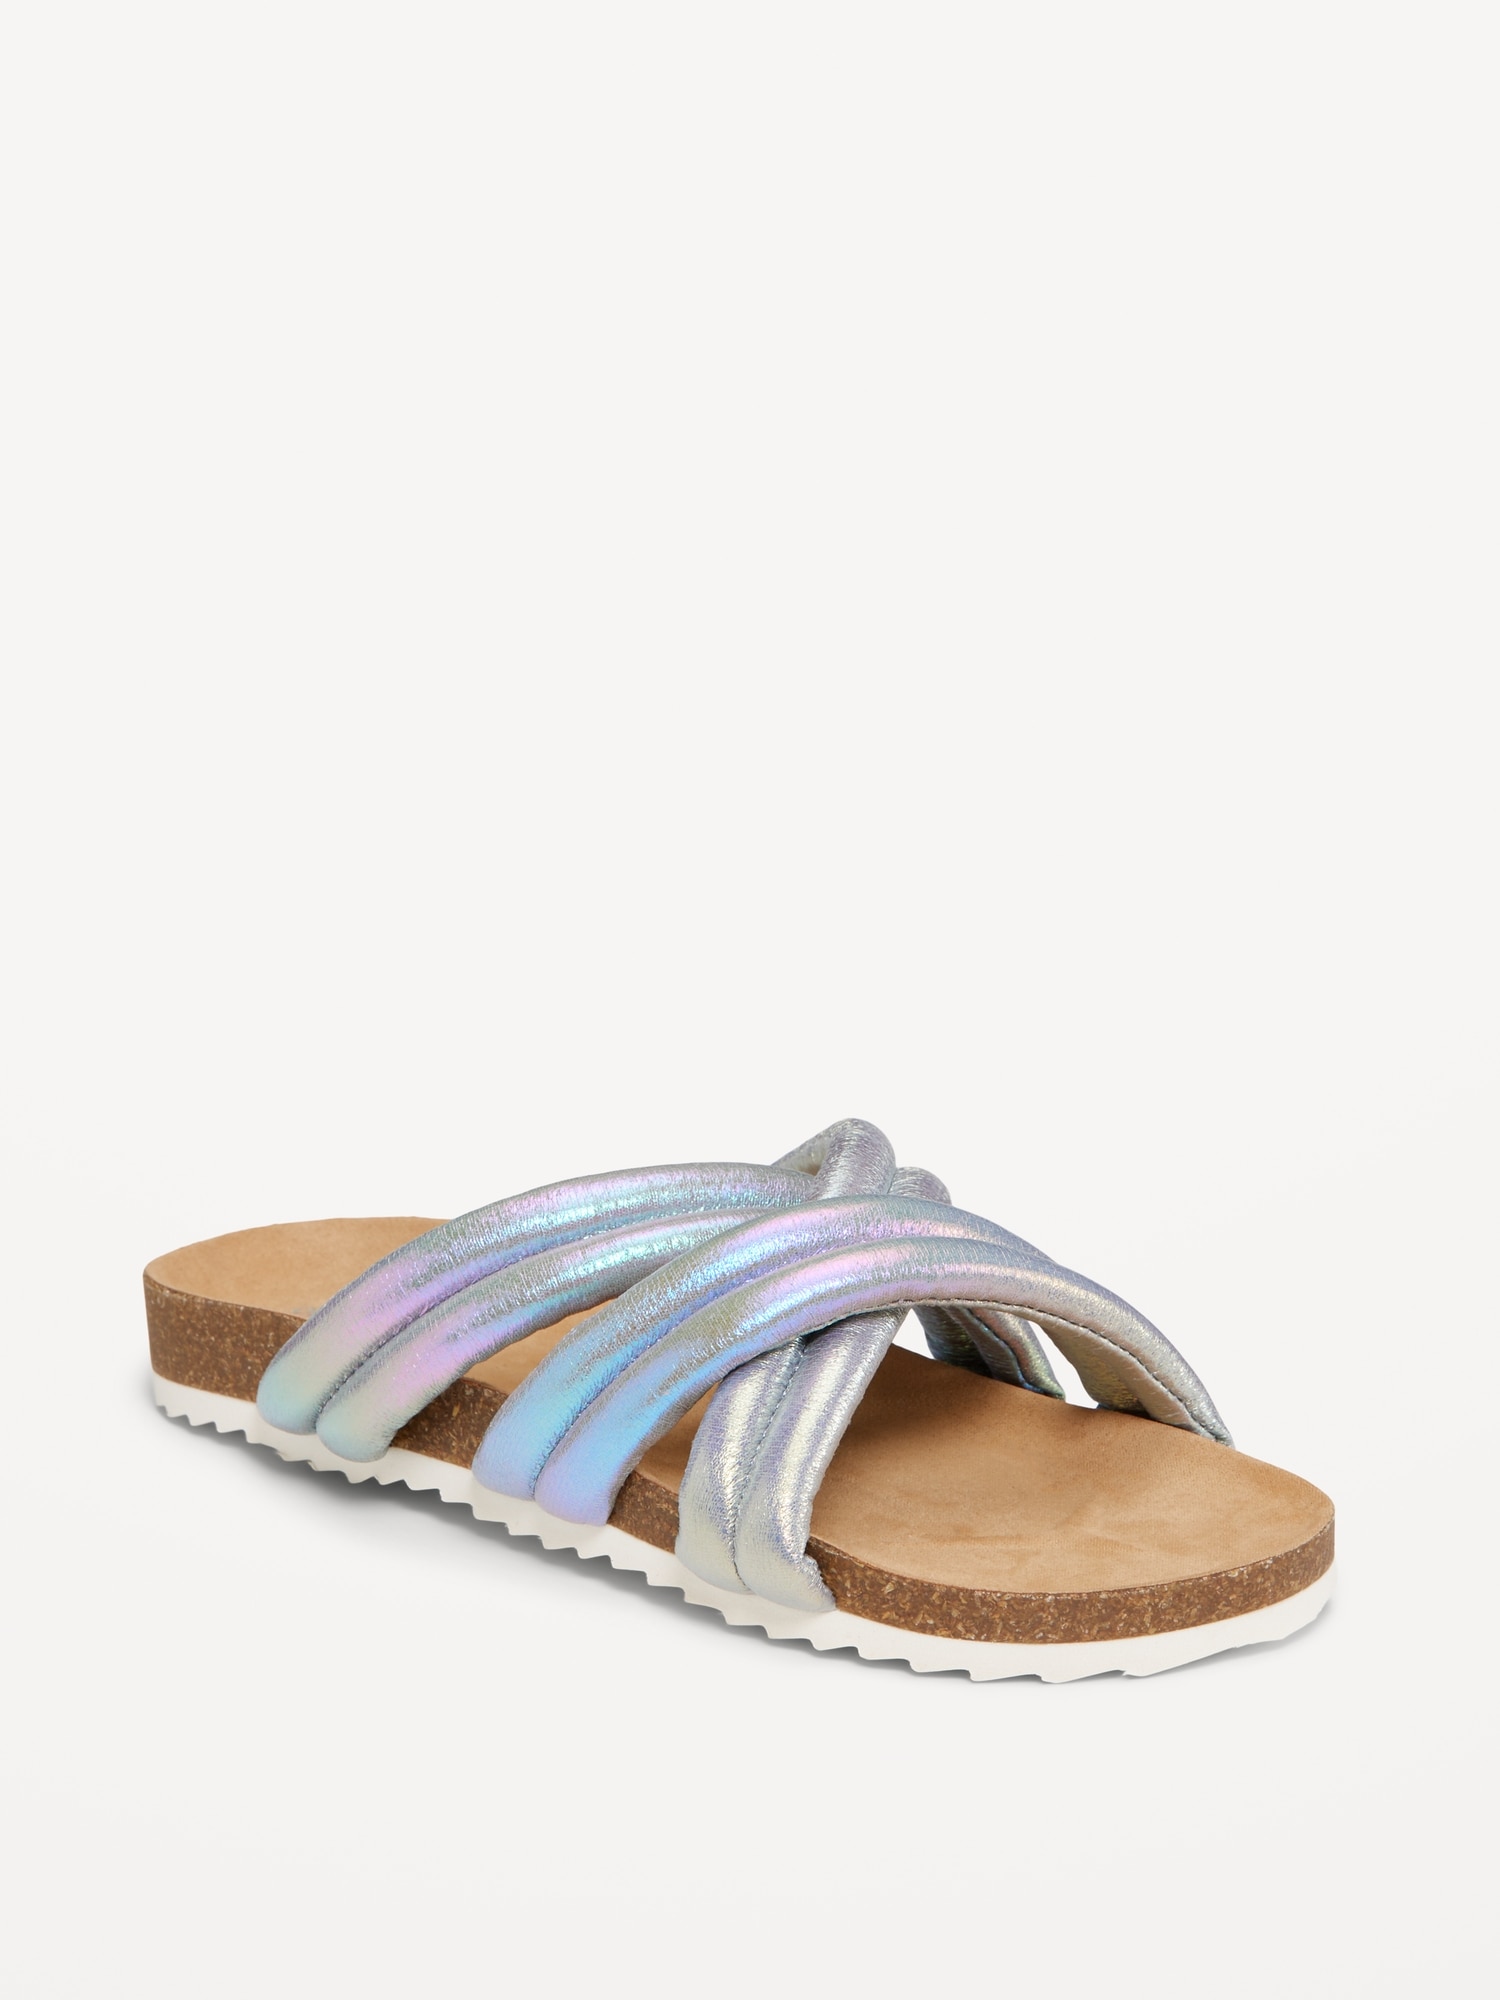 Puffy Strappy Slide Sandals for Girls